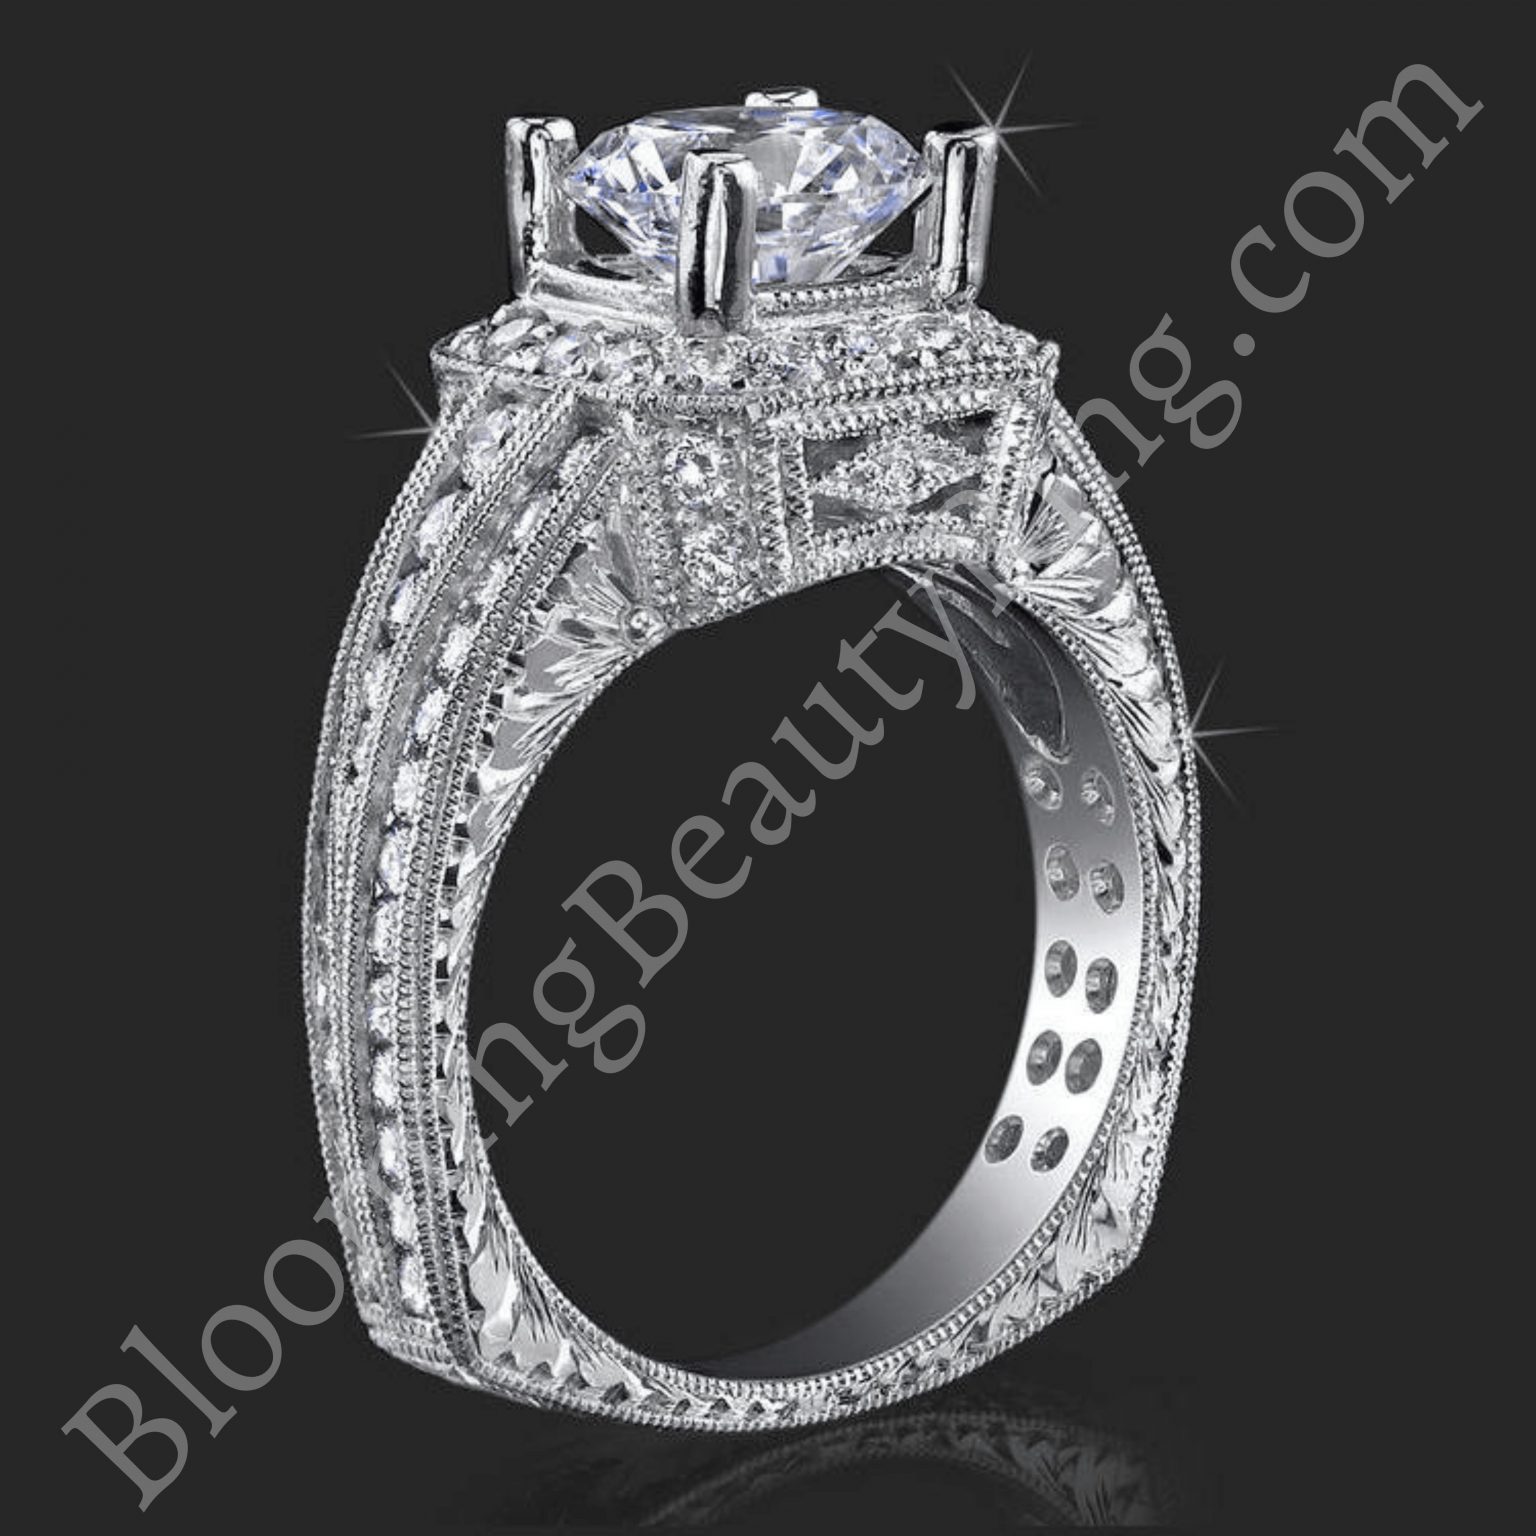 Crown Flat Bottom European Style Band with Over 80 Hand Set High Quality Diamonds